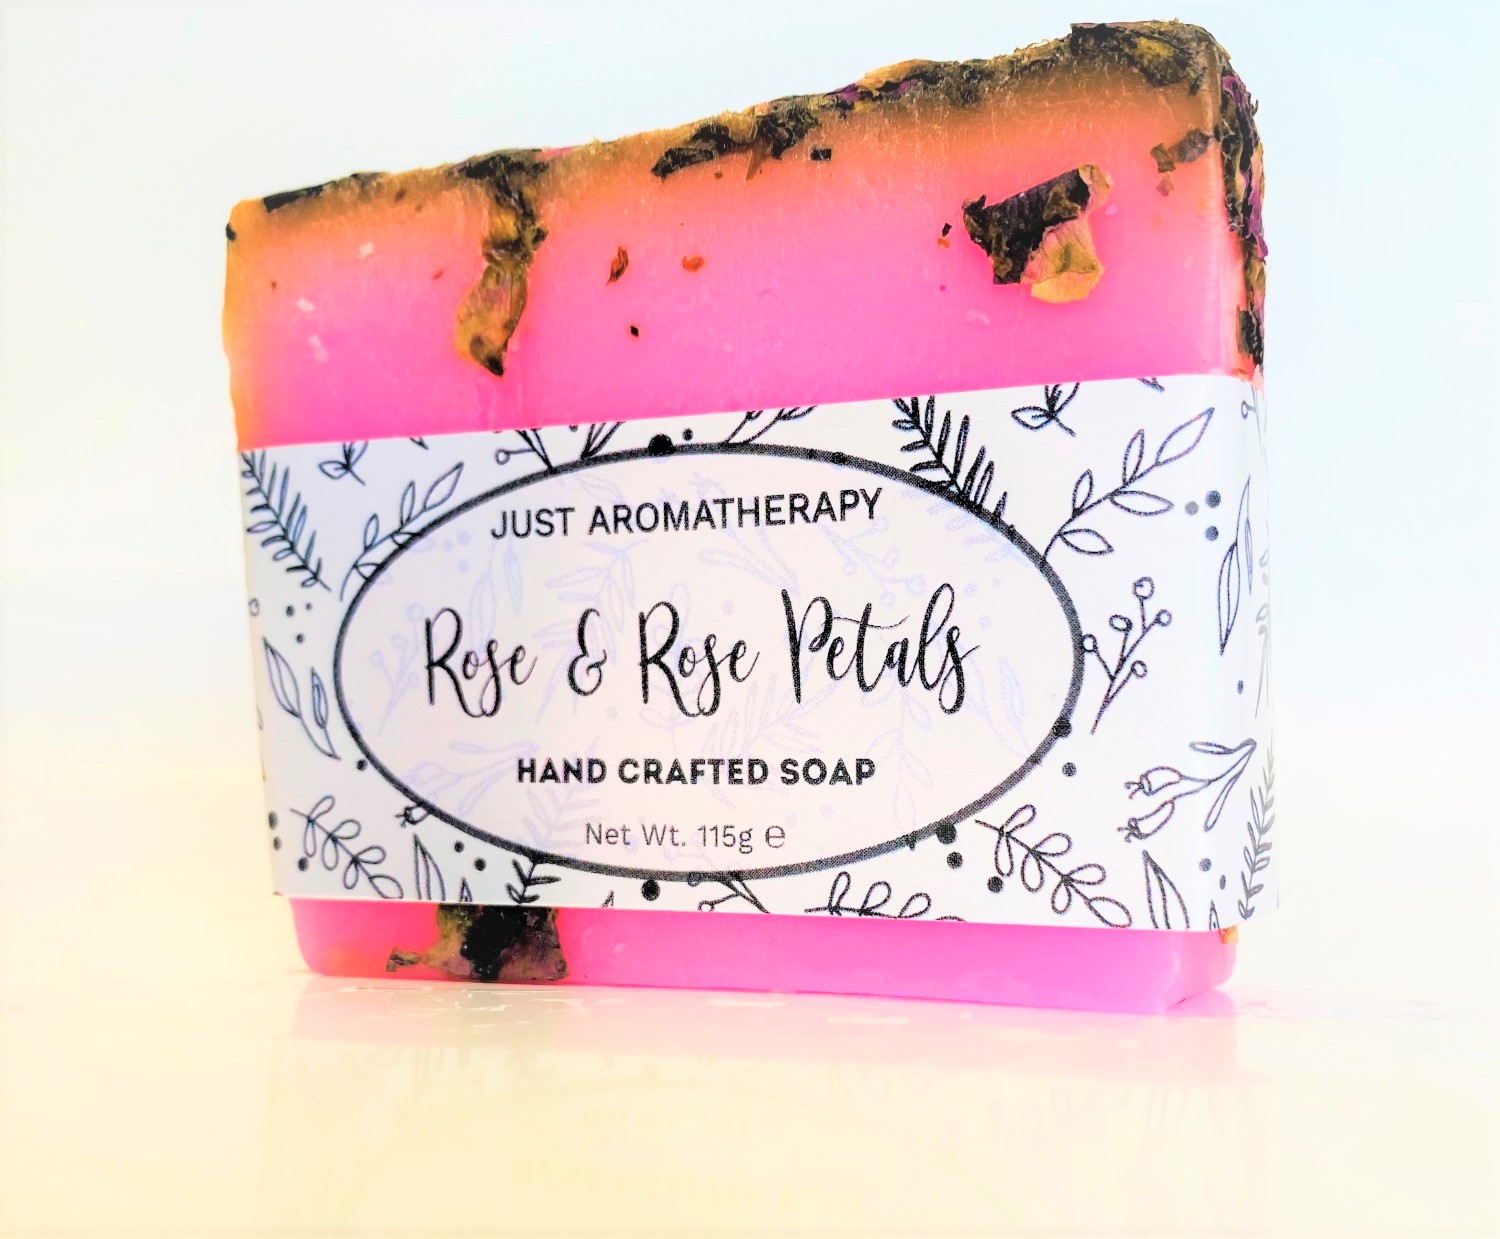 Rose & Rose Petals - Wild & Natural Hand Crafted Soap